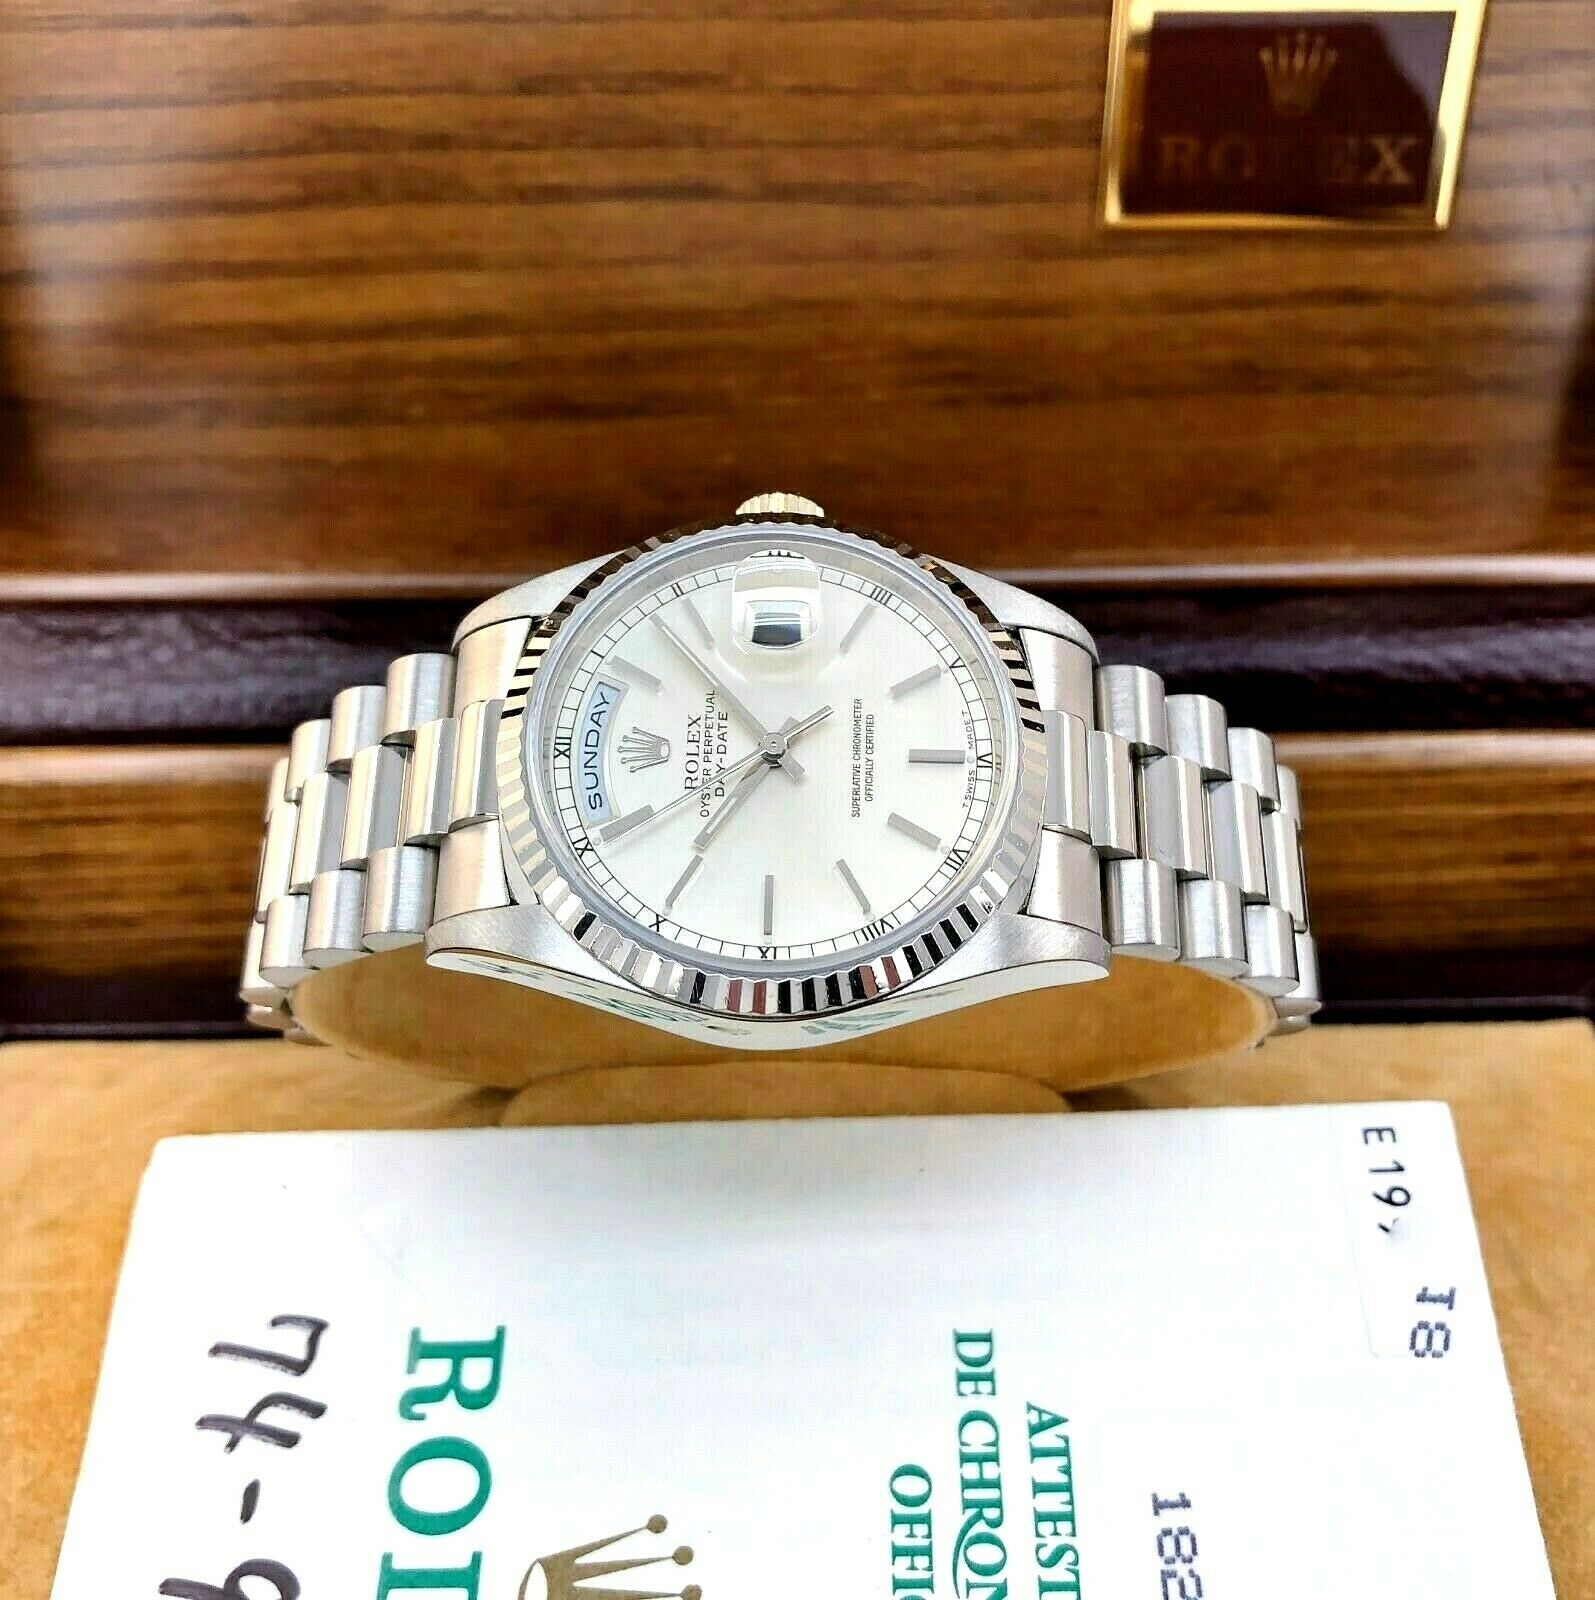 Rolex Day Date President 18K White Gold 36mm Watch 18239 Box and Paper –